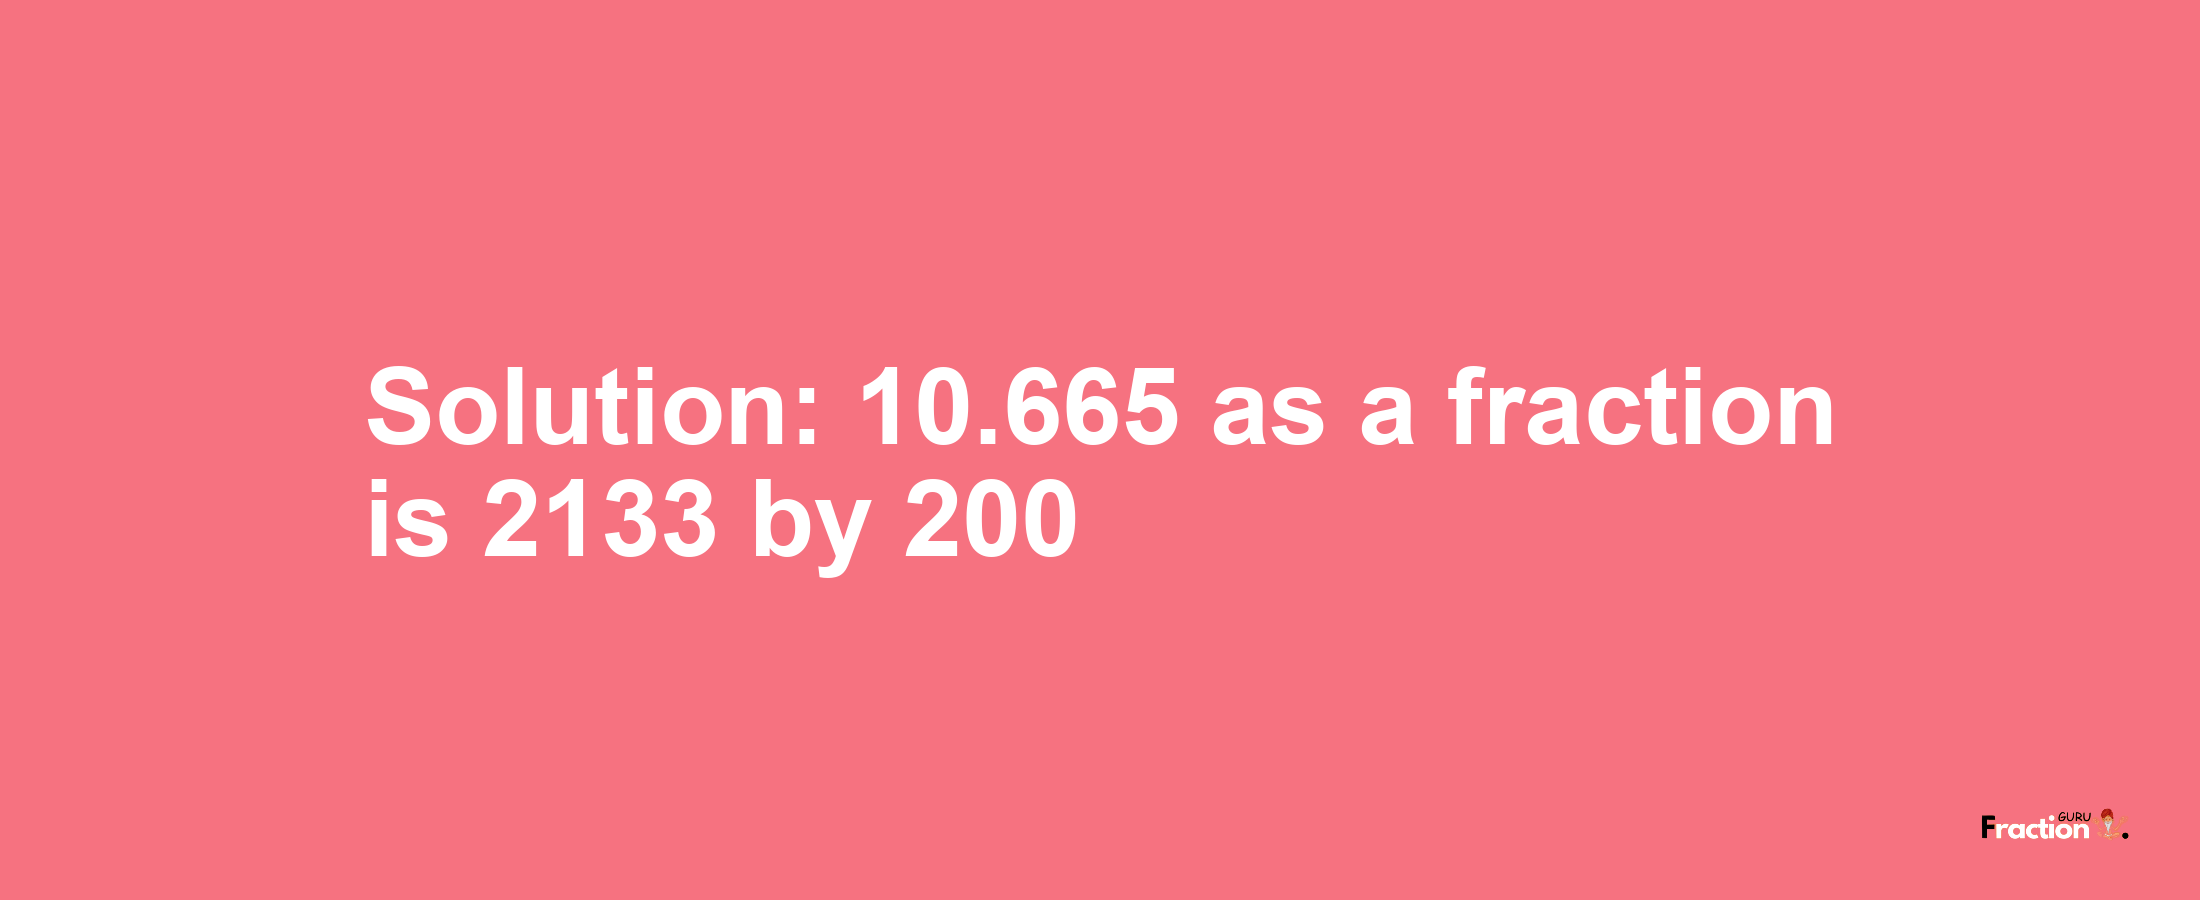 Solution:10.665 as a fraction is 2133/200